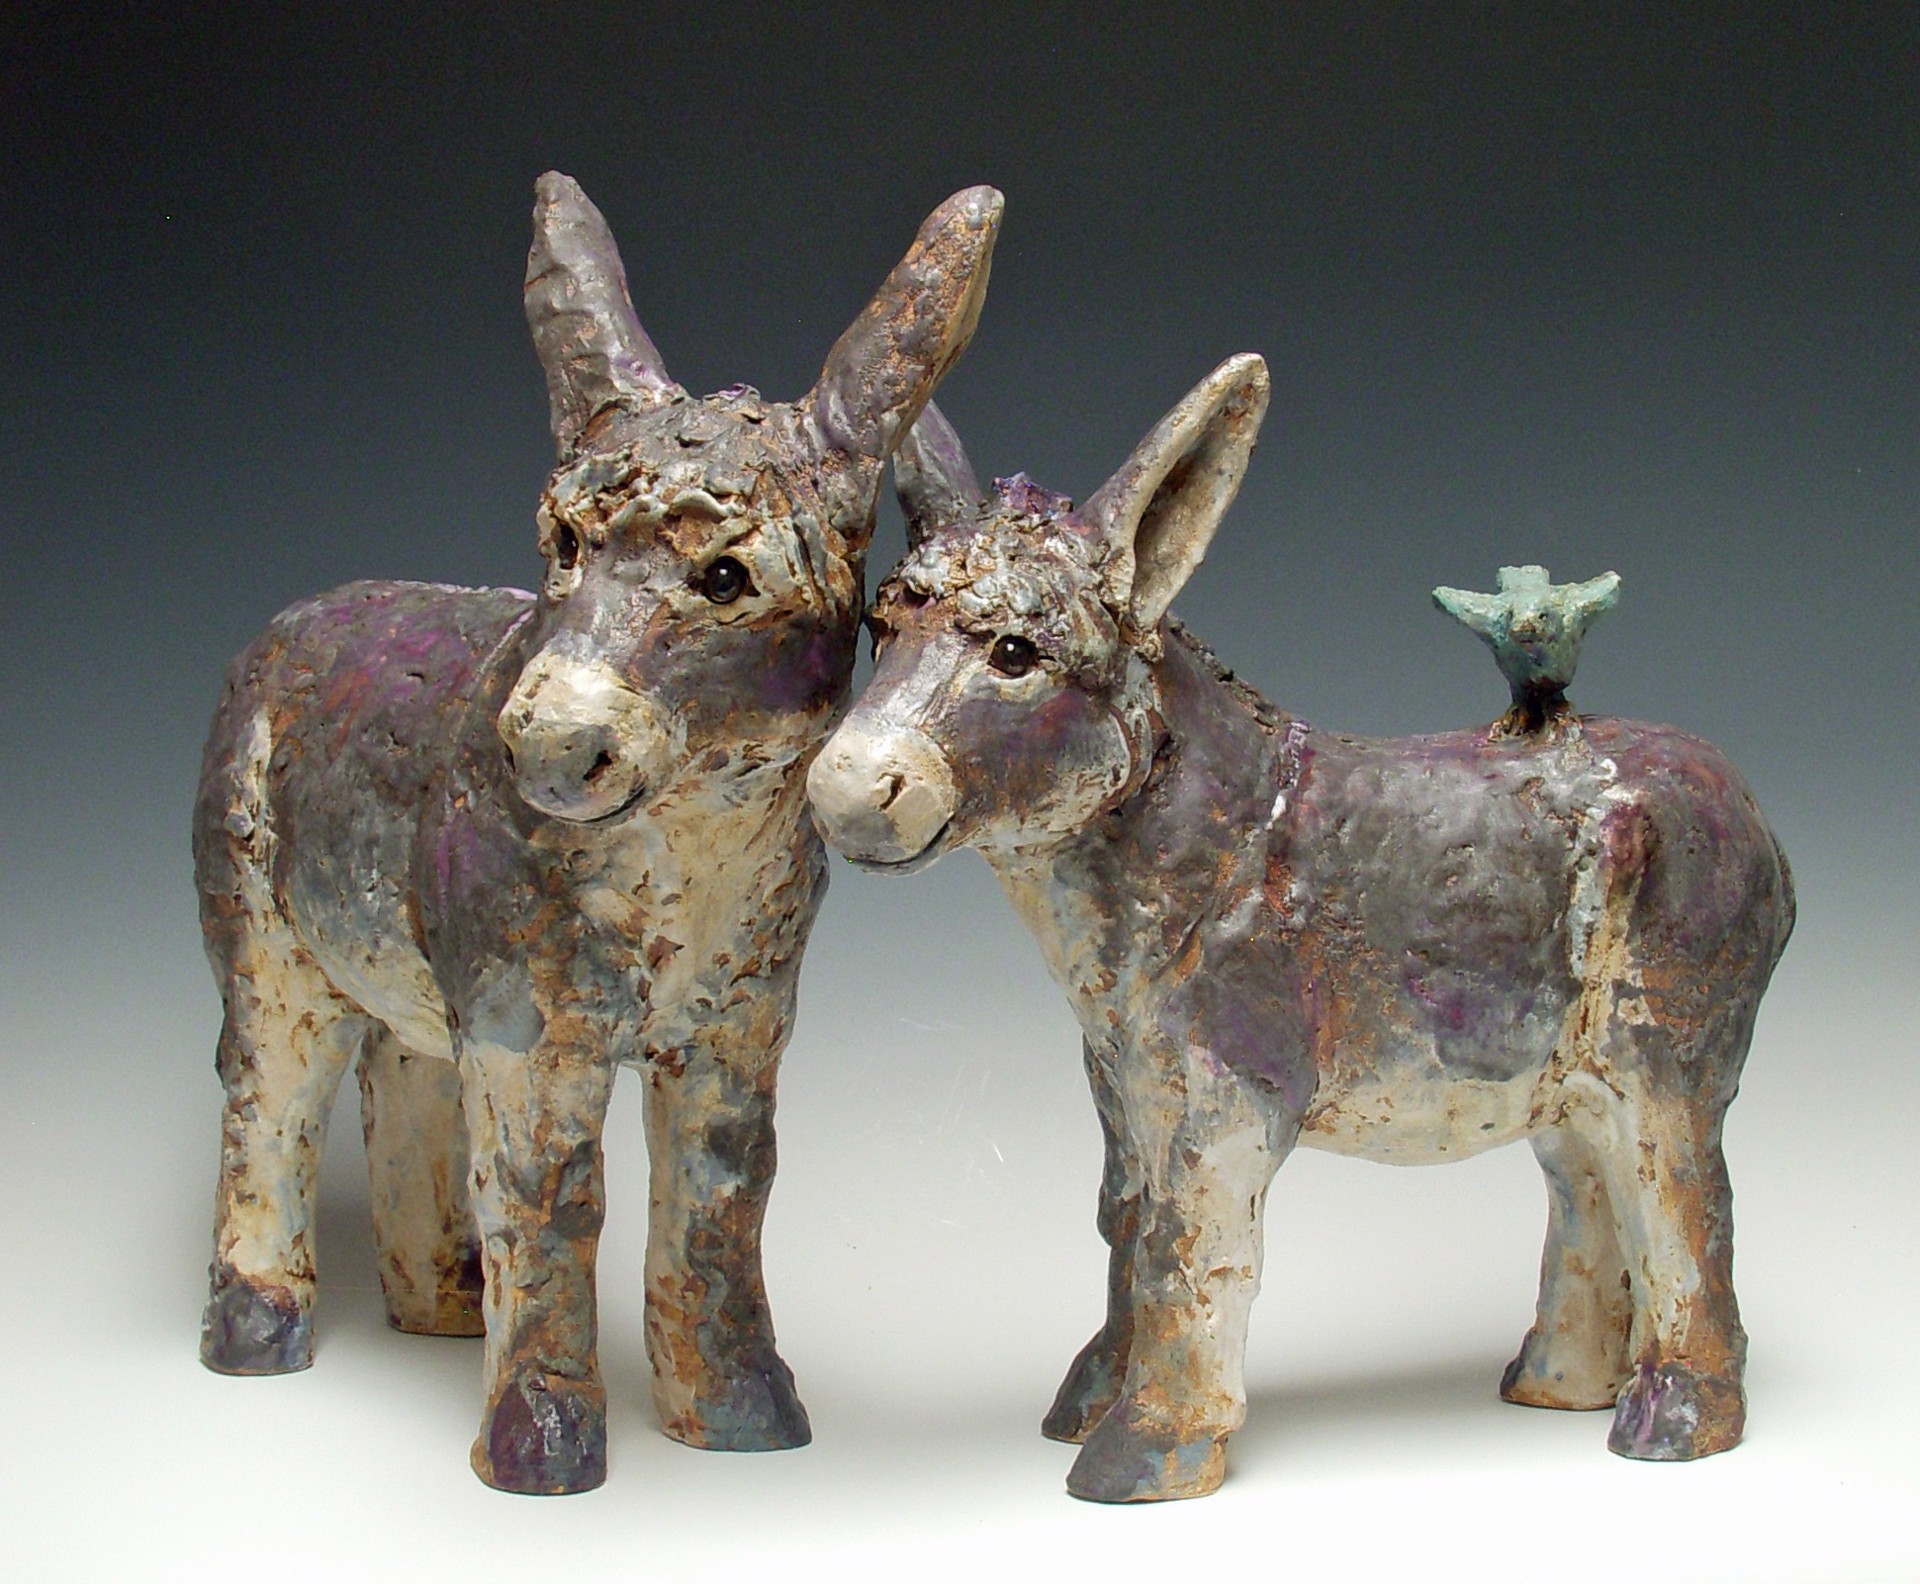 Russ and Roxy (Donkey pair. Can be purchased separately) by Kari Rives